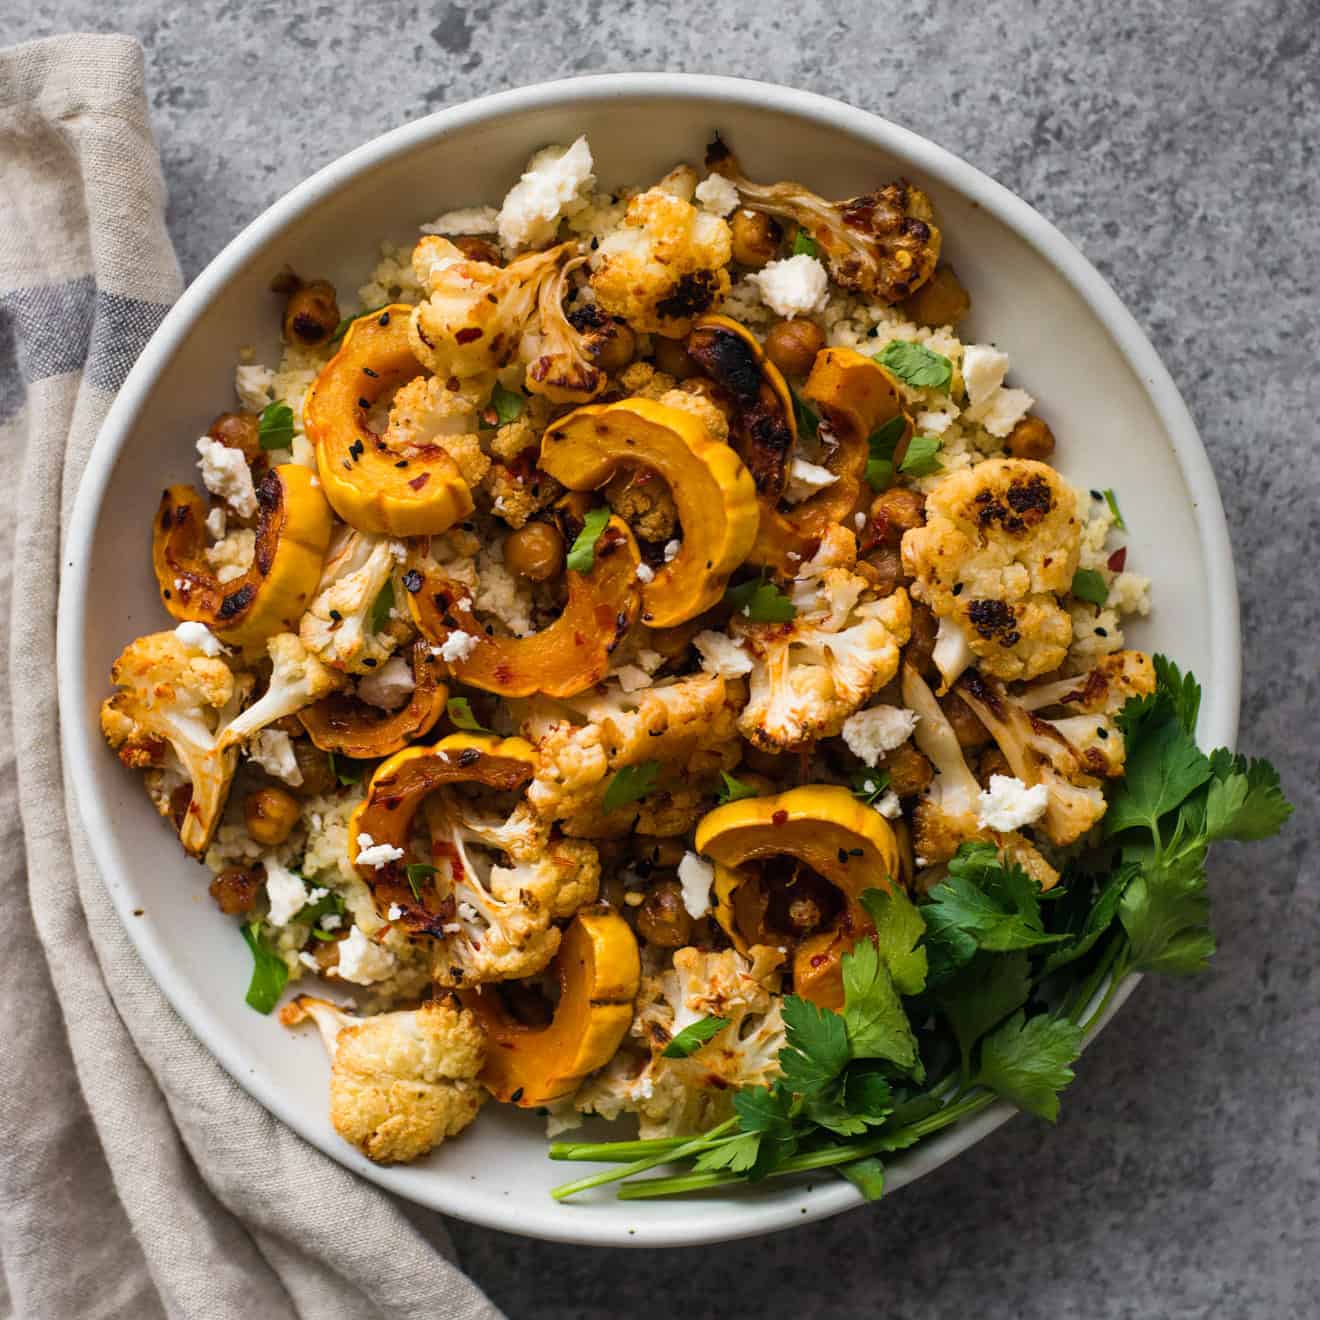 This Harissa Roasted Cauliflower with Delicata Squash and Chickpeas is a healthy, gluten-free weeknight dinner!